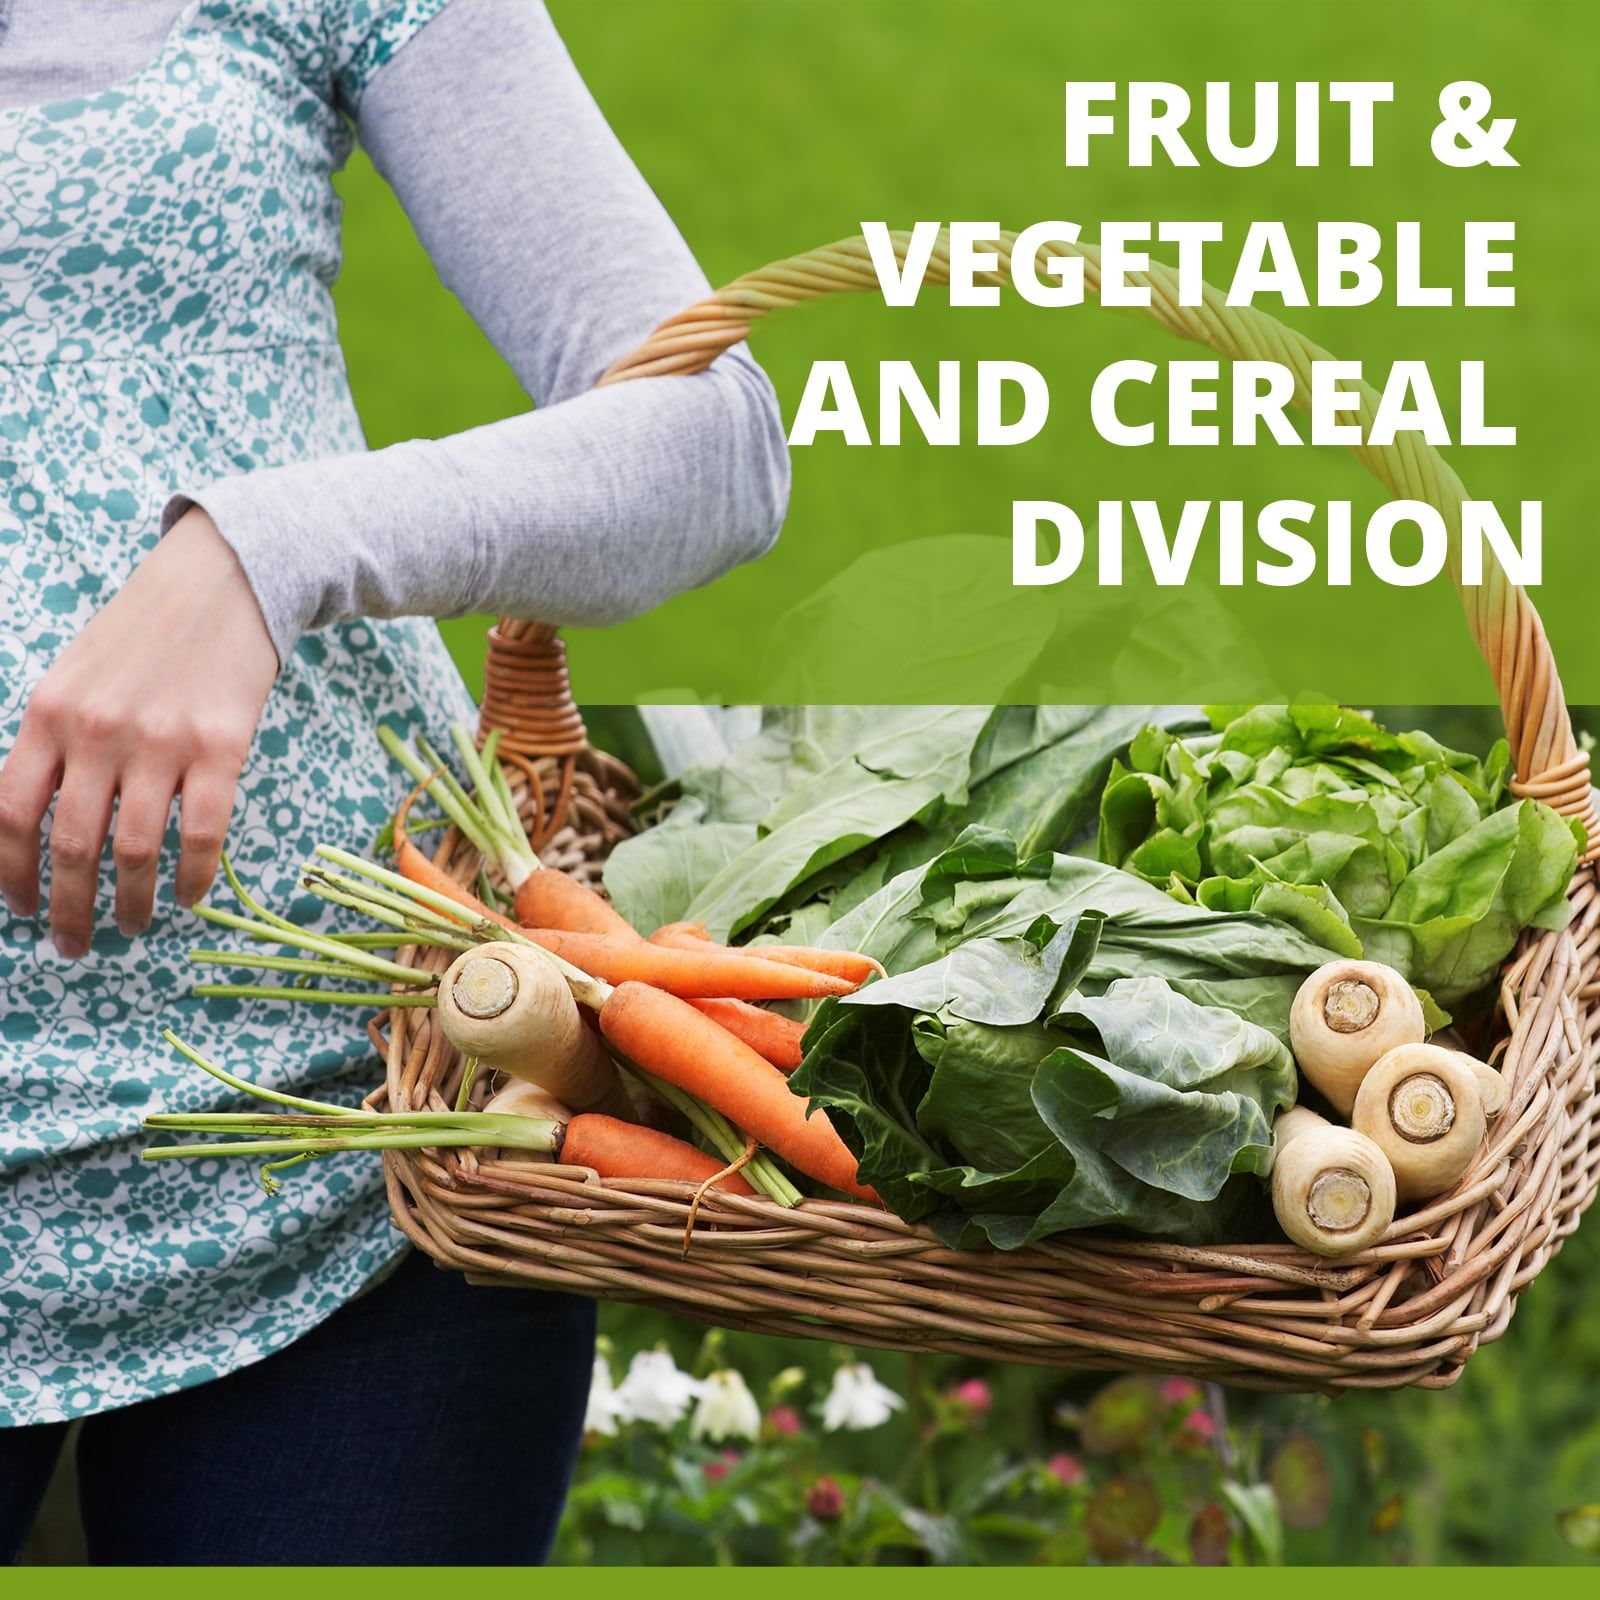 FRUIT, VEGETABLE and CEREAL DIVISION